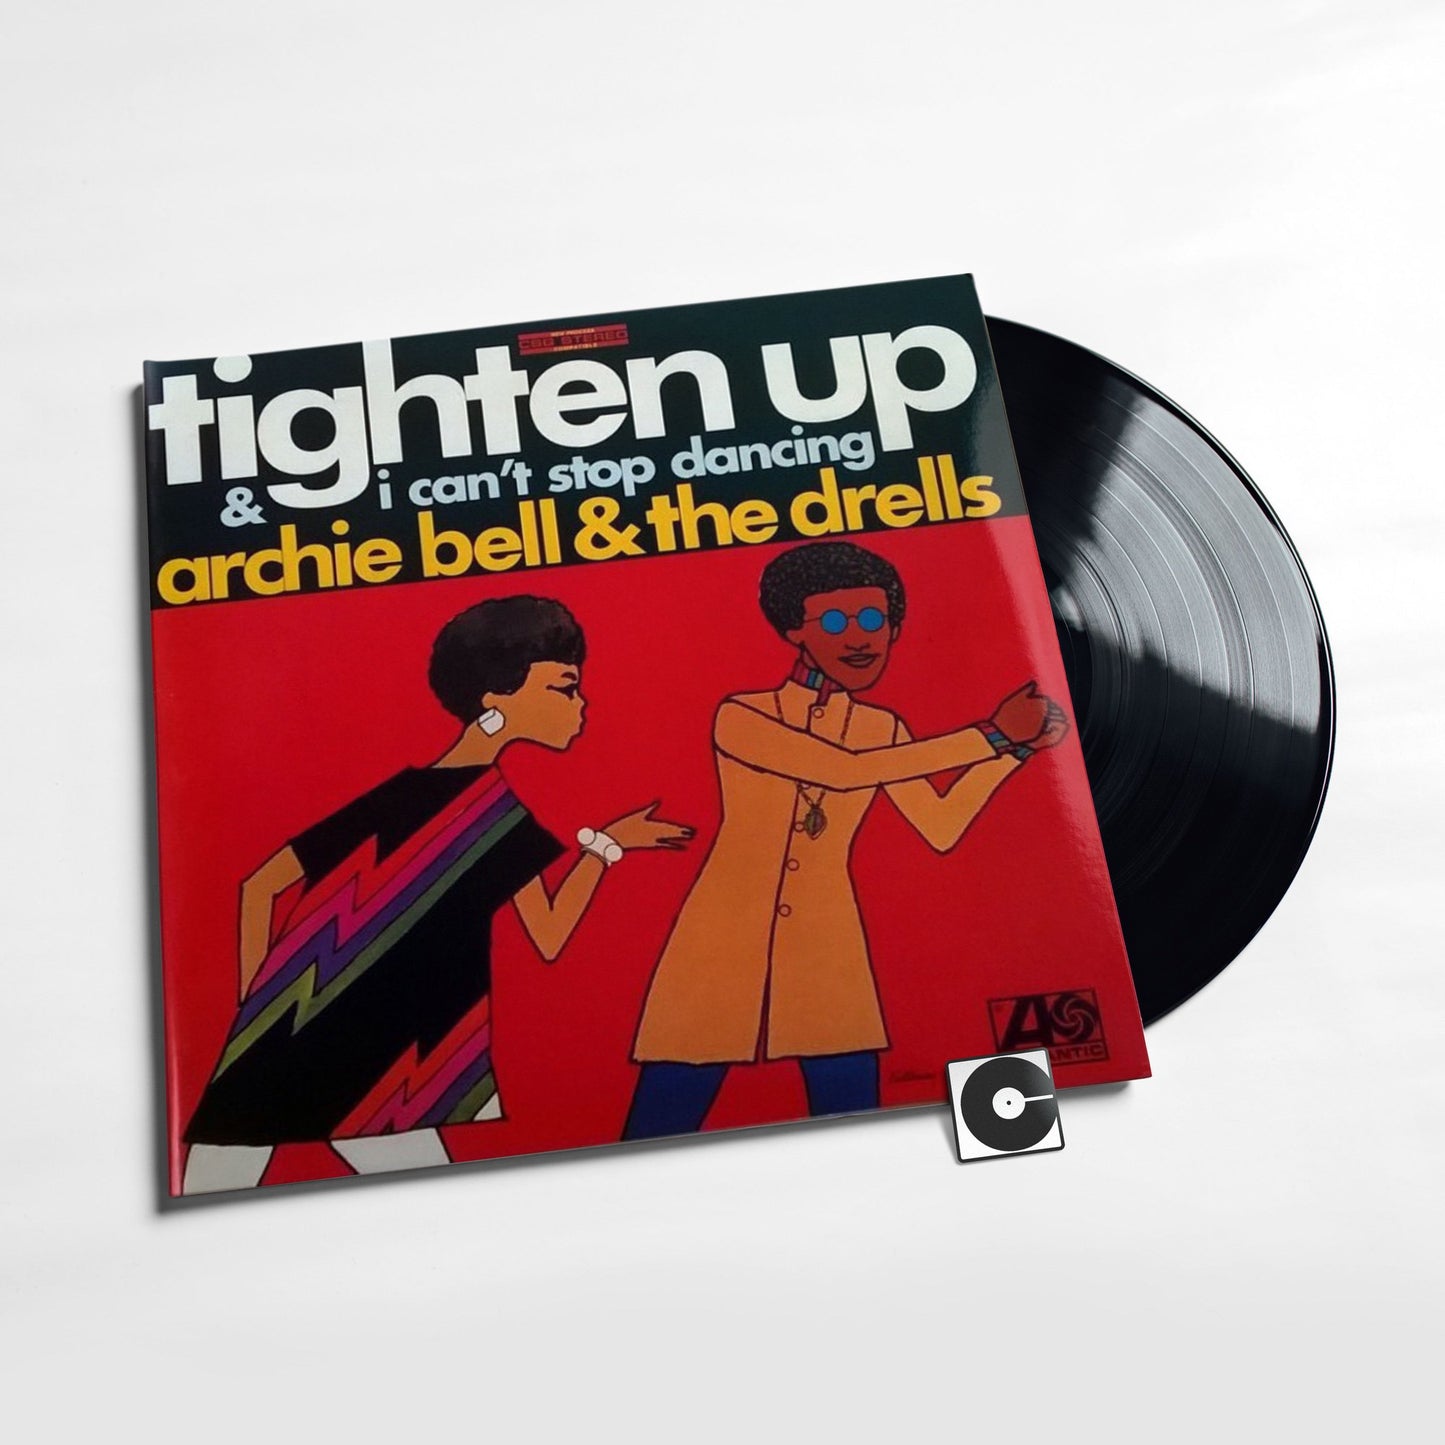 Archie Bell & the Drells - " Tighten Up"